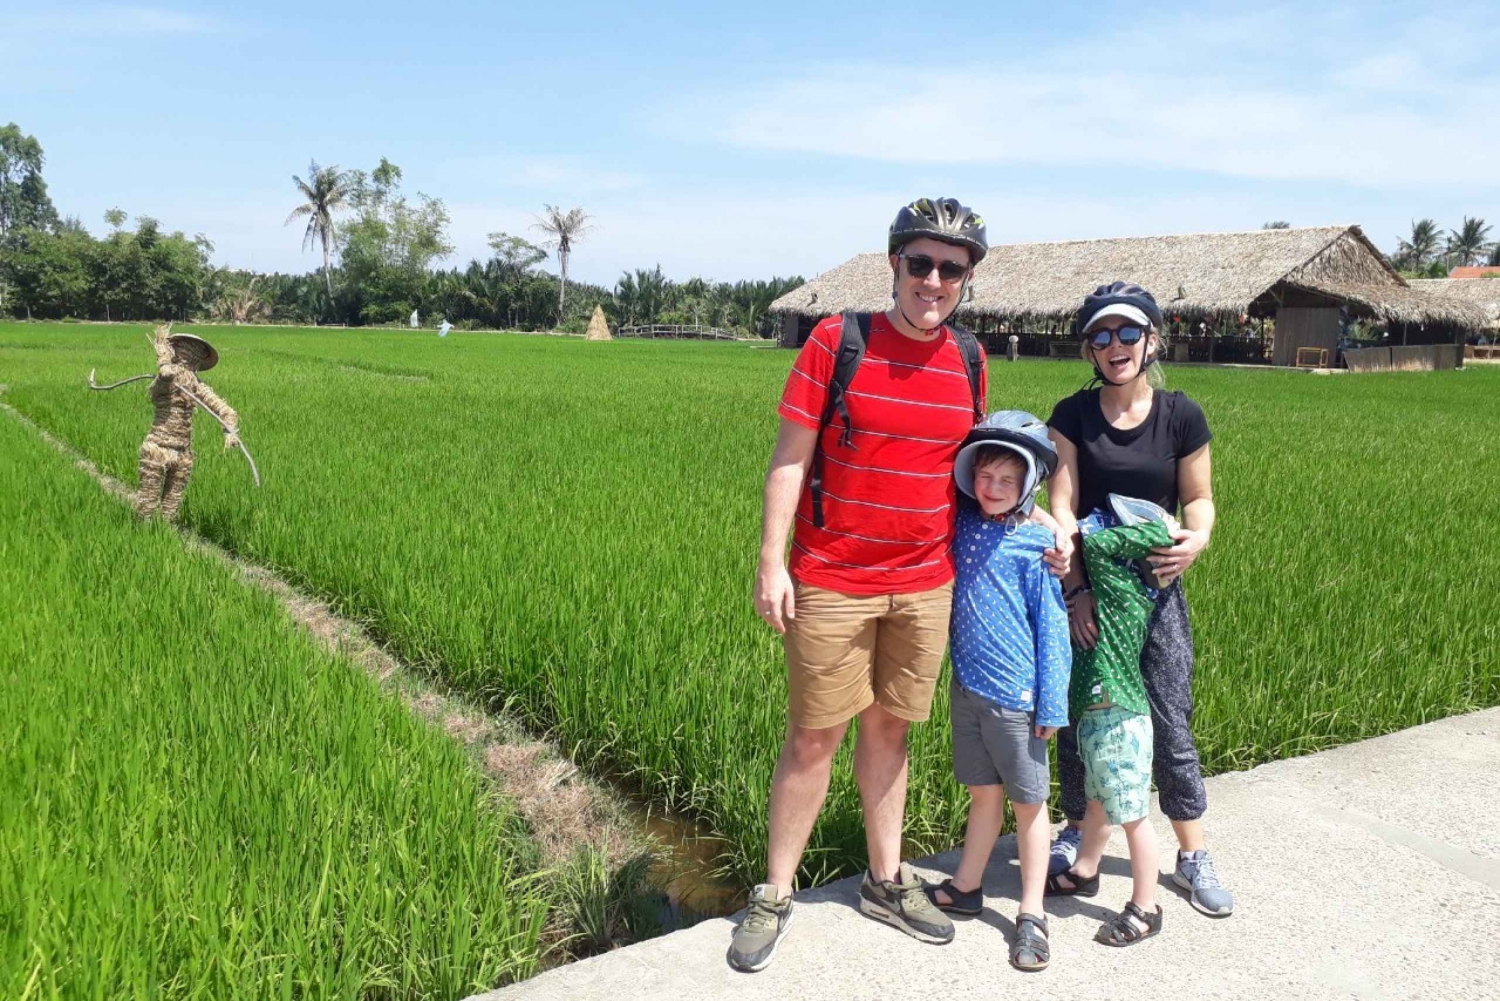 Ho Chi Minh City: Mekong Delta Small Group Day Tour by Bike